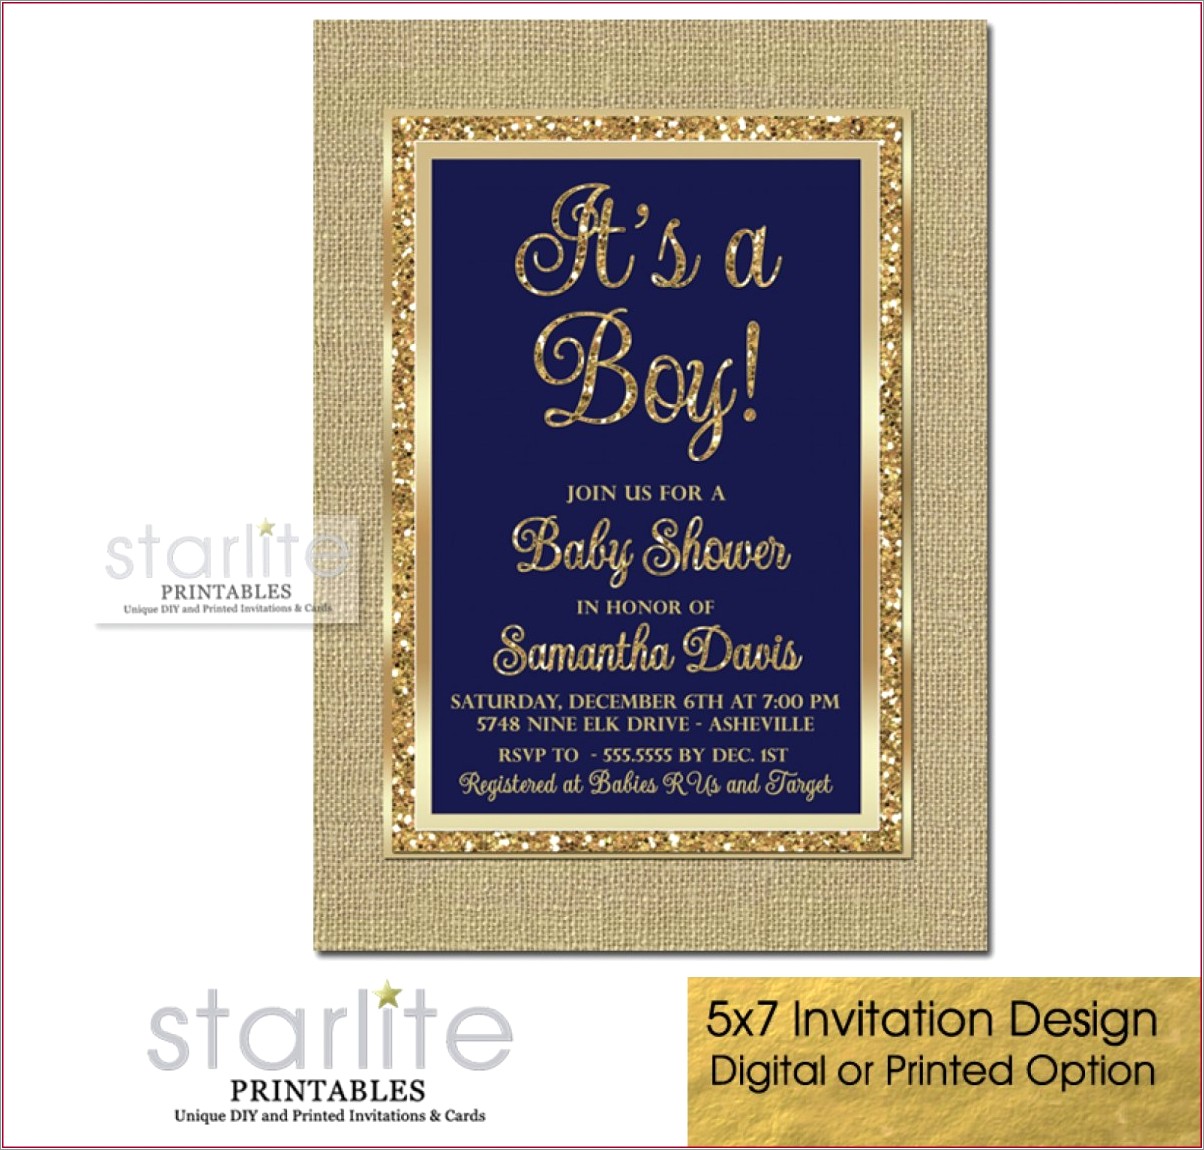 Blue And Gold Wedding Invitations